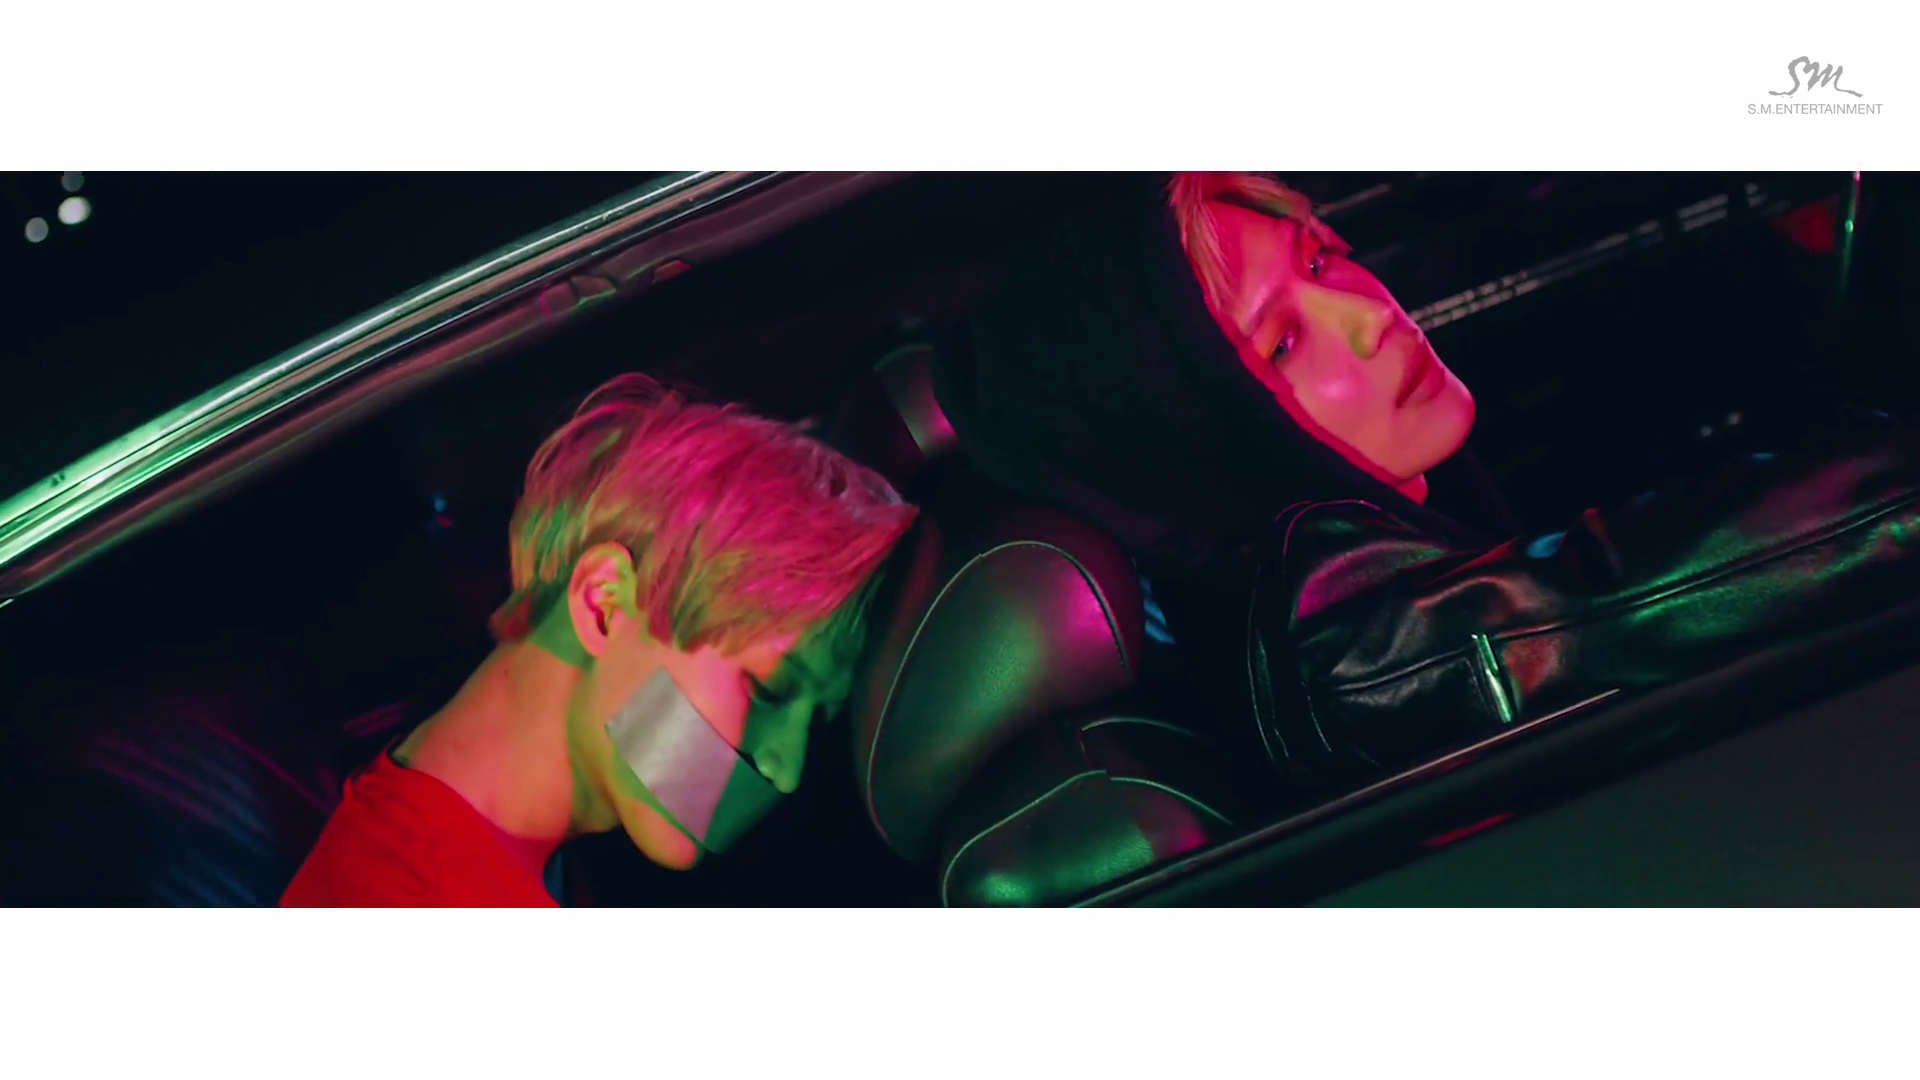 [ENG] Taemin – Press Your Number